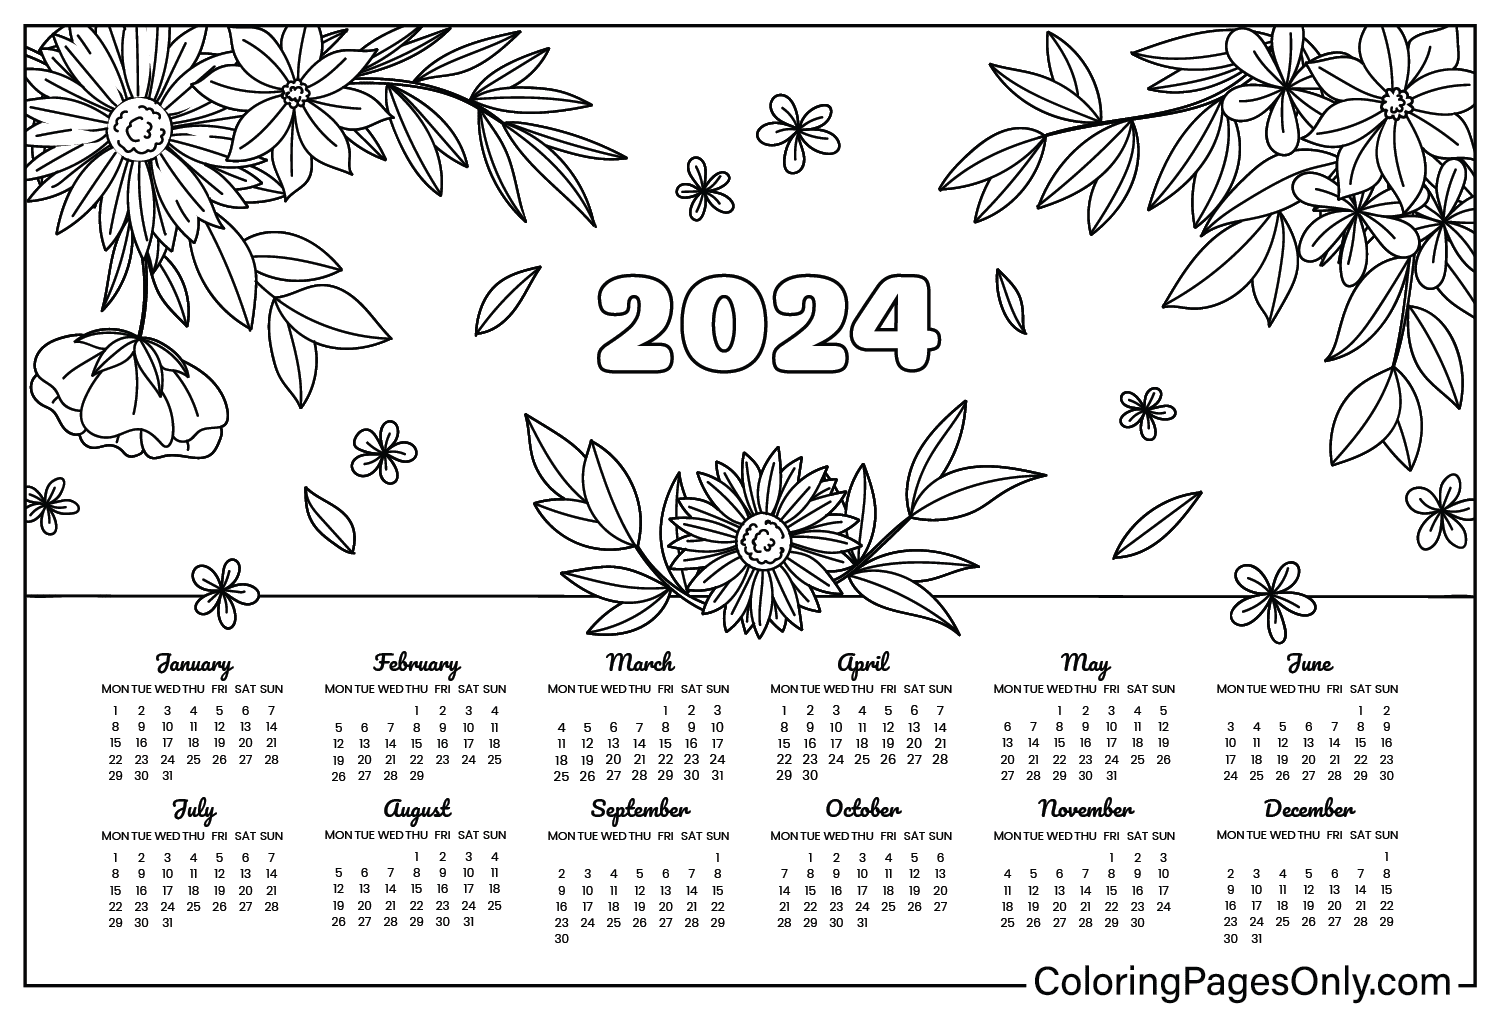 18 Free Printable Calendar 2024 Coloring Pages | Coloring Pages with Free Printable Black And White Calendar 2024